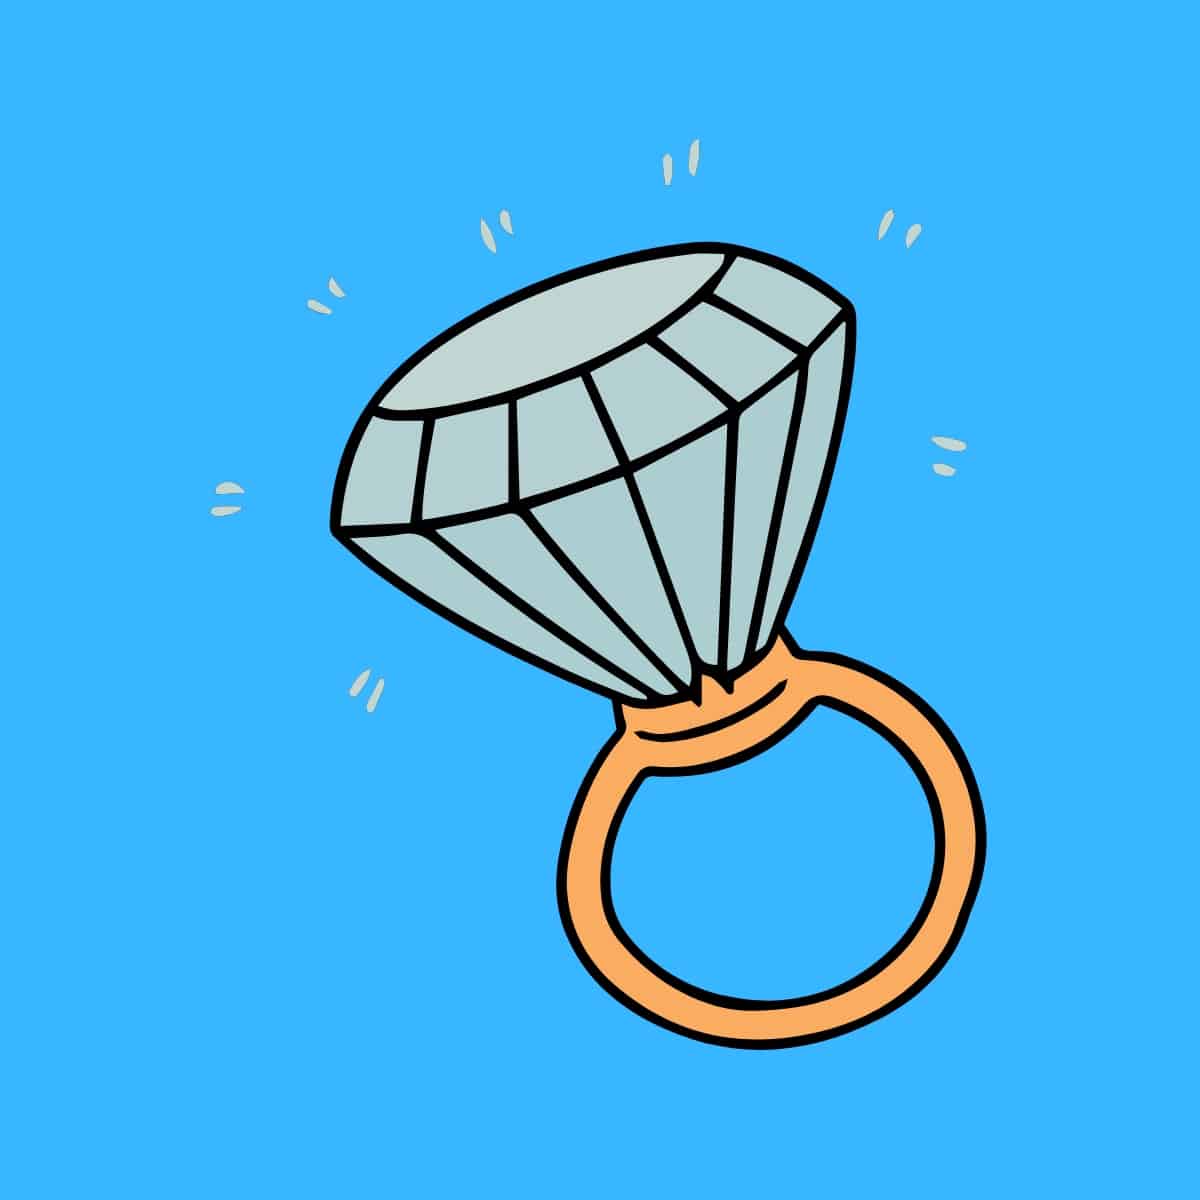 Cartoon graphic of a very large diamond ring on a blue background.